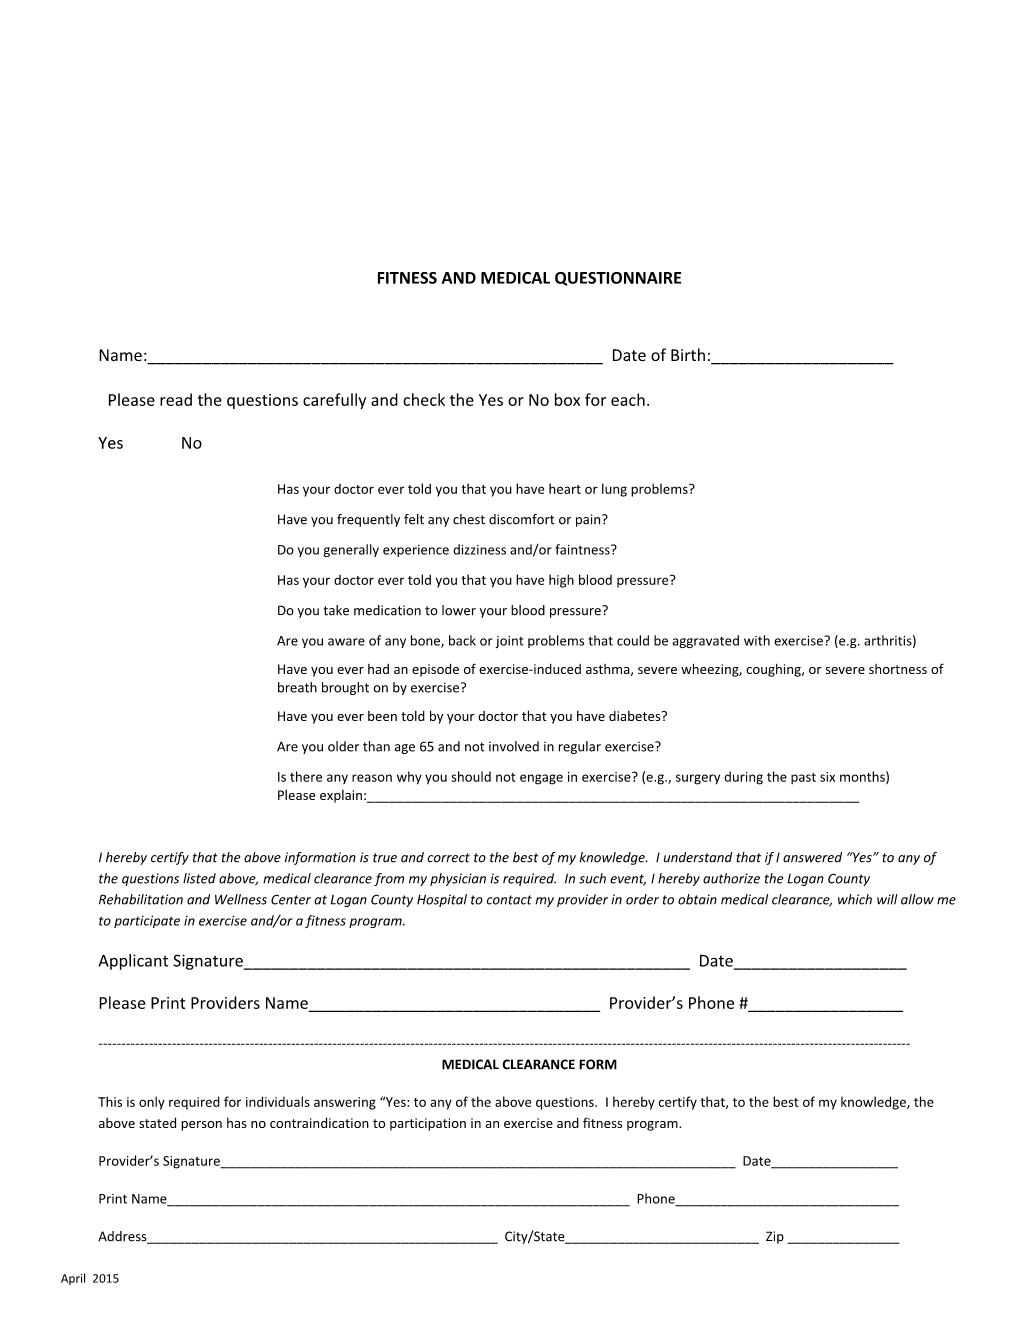 Fitness and Medical Questionnaire